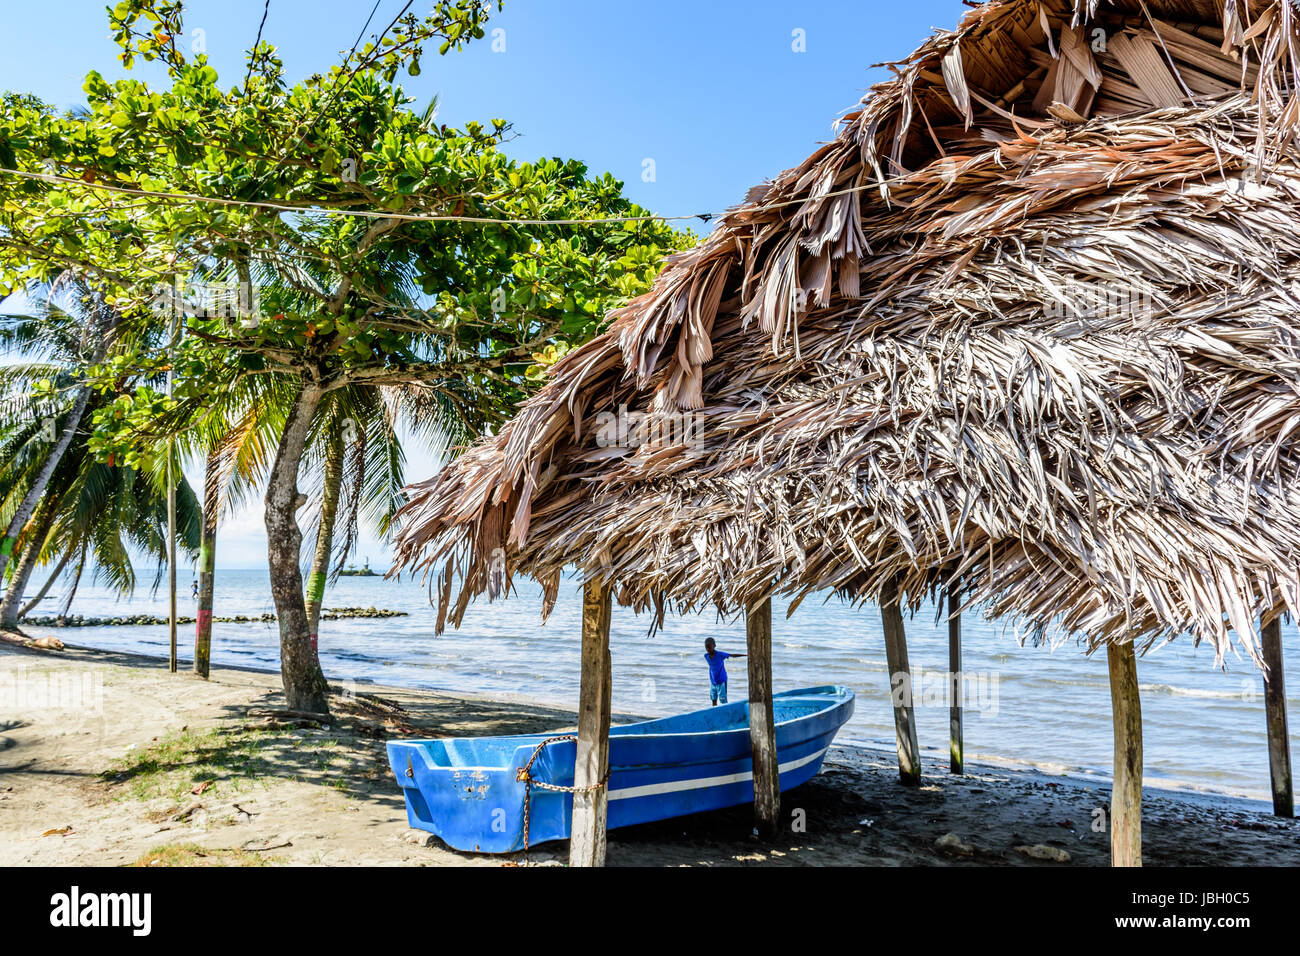 Livingston, Guatemala - August 31, 2016: Boat pulled ashore next to palapa on beach in Caribbean town of Livingston Stock Photo